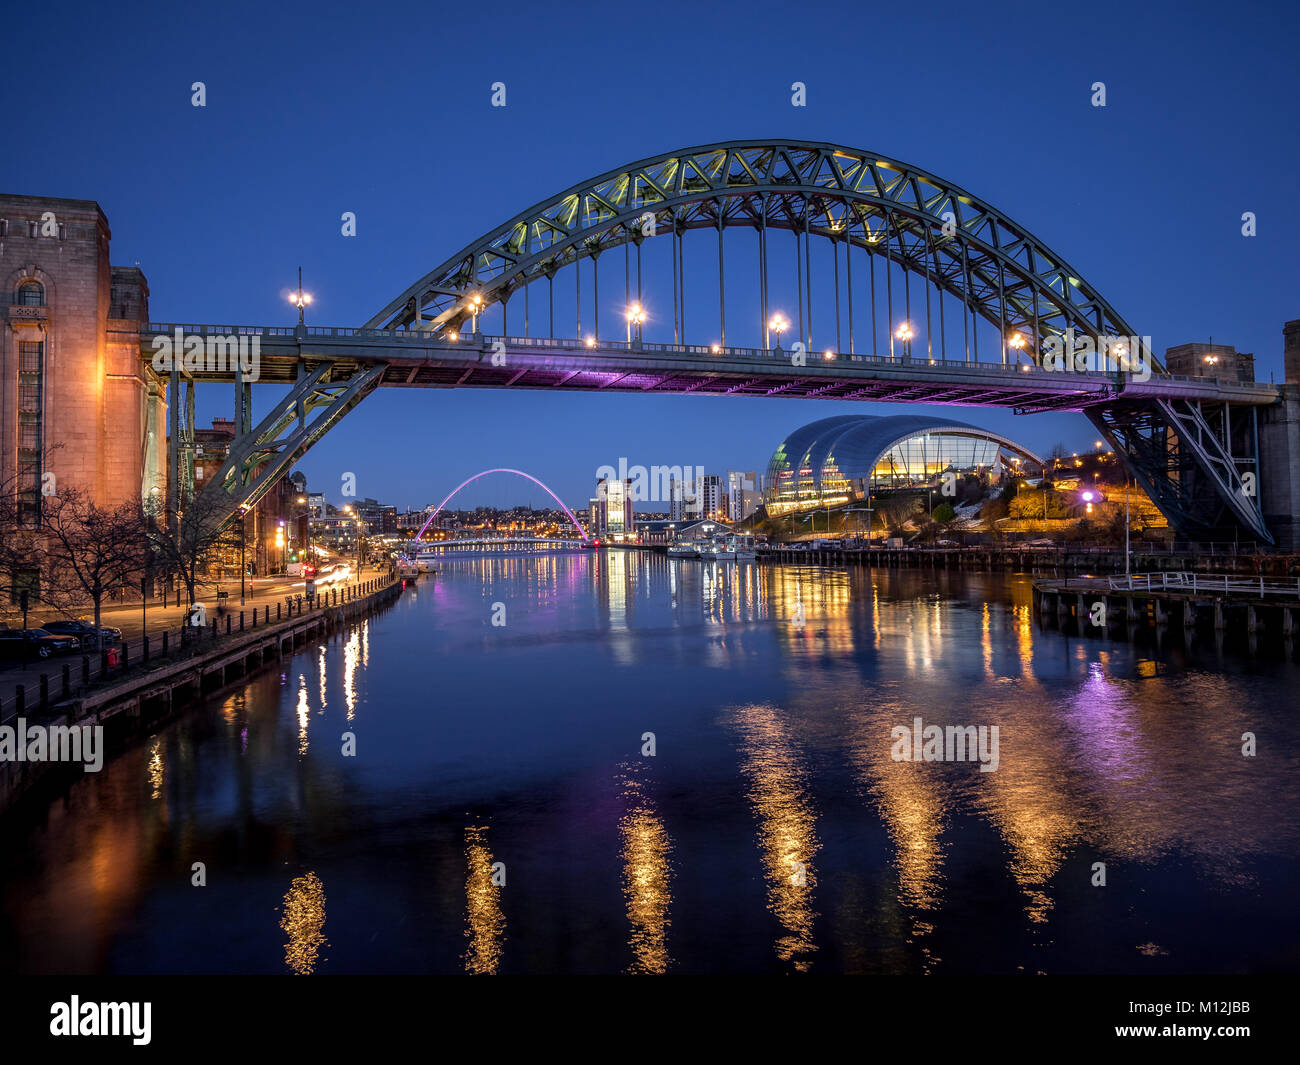 NEWCASTLE UPON TYNE, TYNE AND WEAR/UK - JANUARY 20 : View of the Tyne and Millennium Bridges at dusk in Newcastle upon Tyne, Tyne and Wear on January 20, 2018 Stock Photo